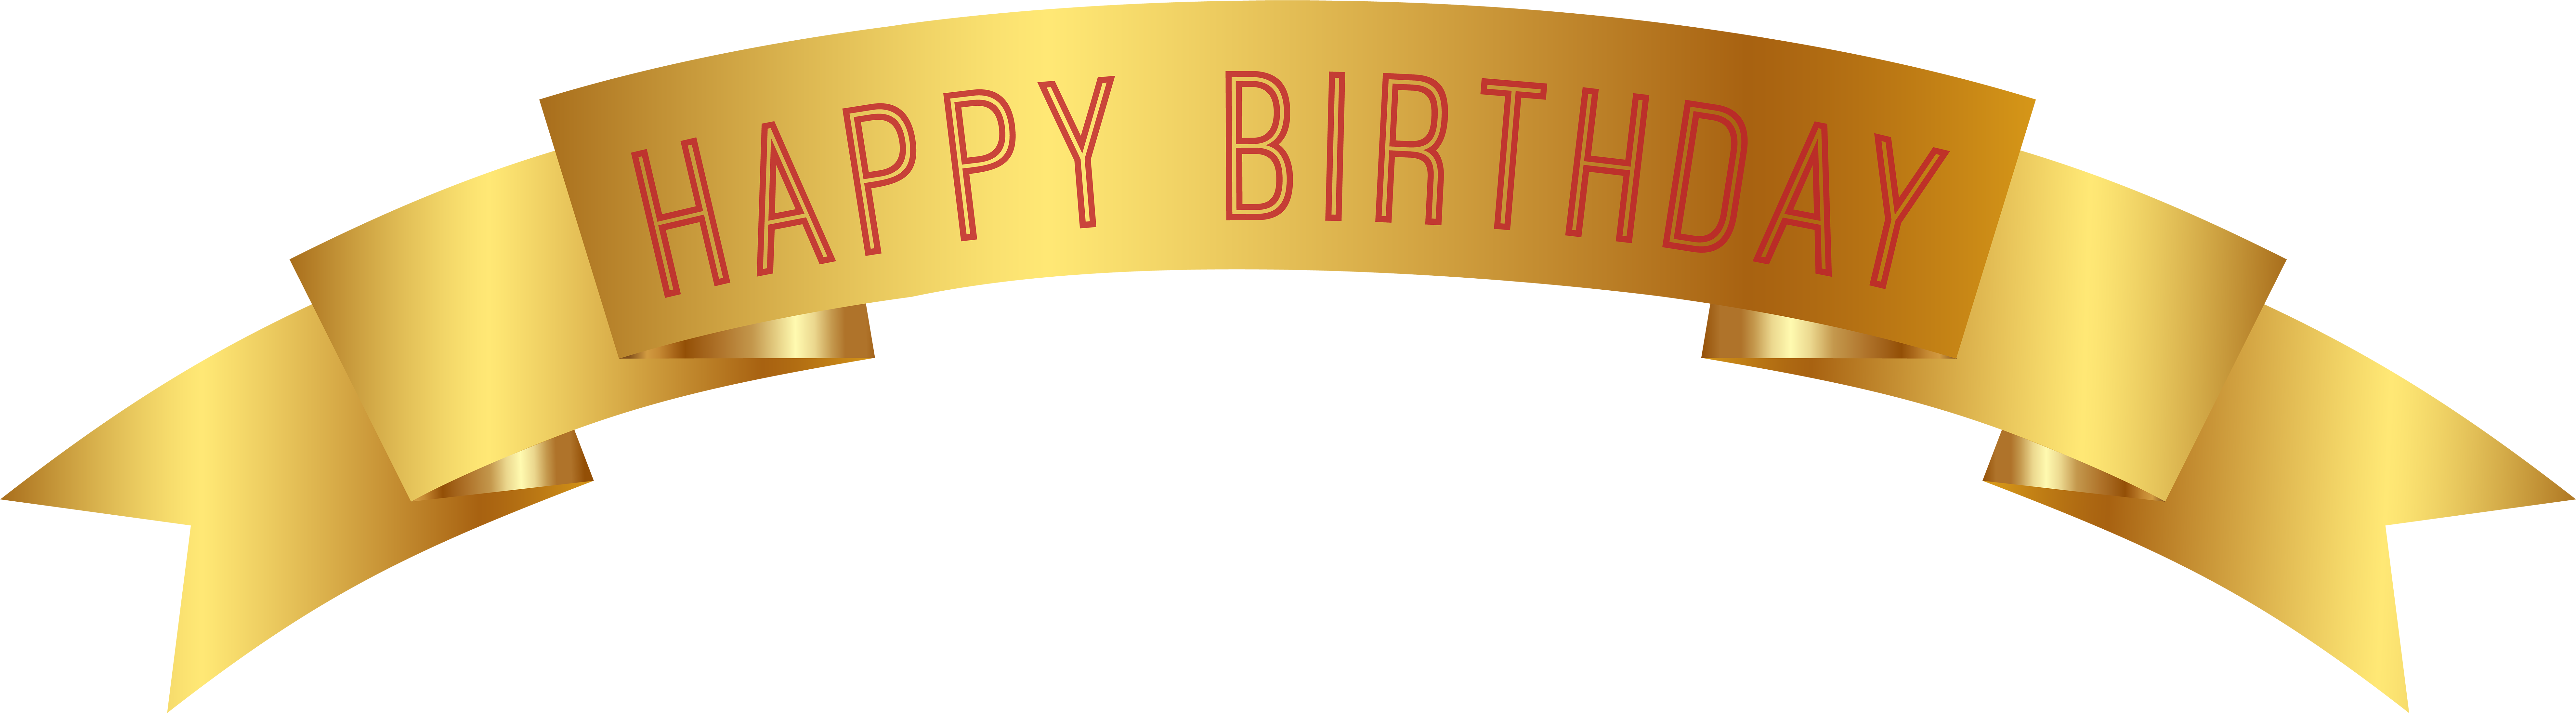 free-happy-birthday-banner-png-download-free-happy-birthday-banner-png